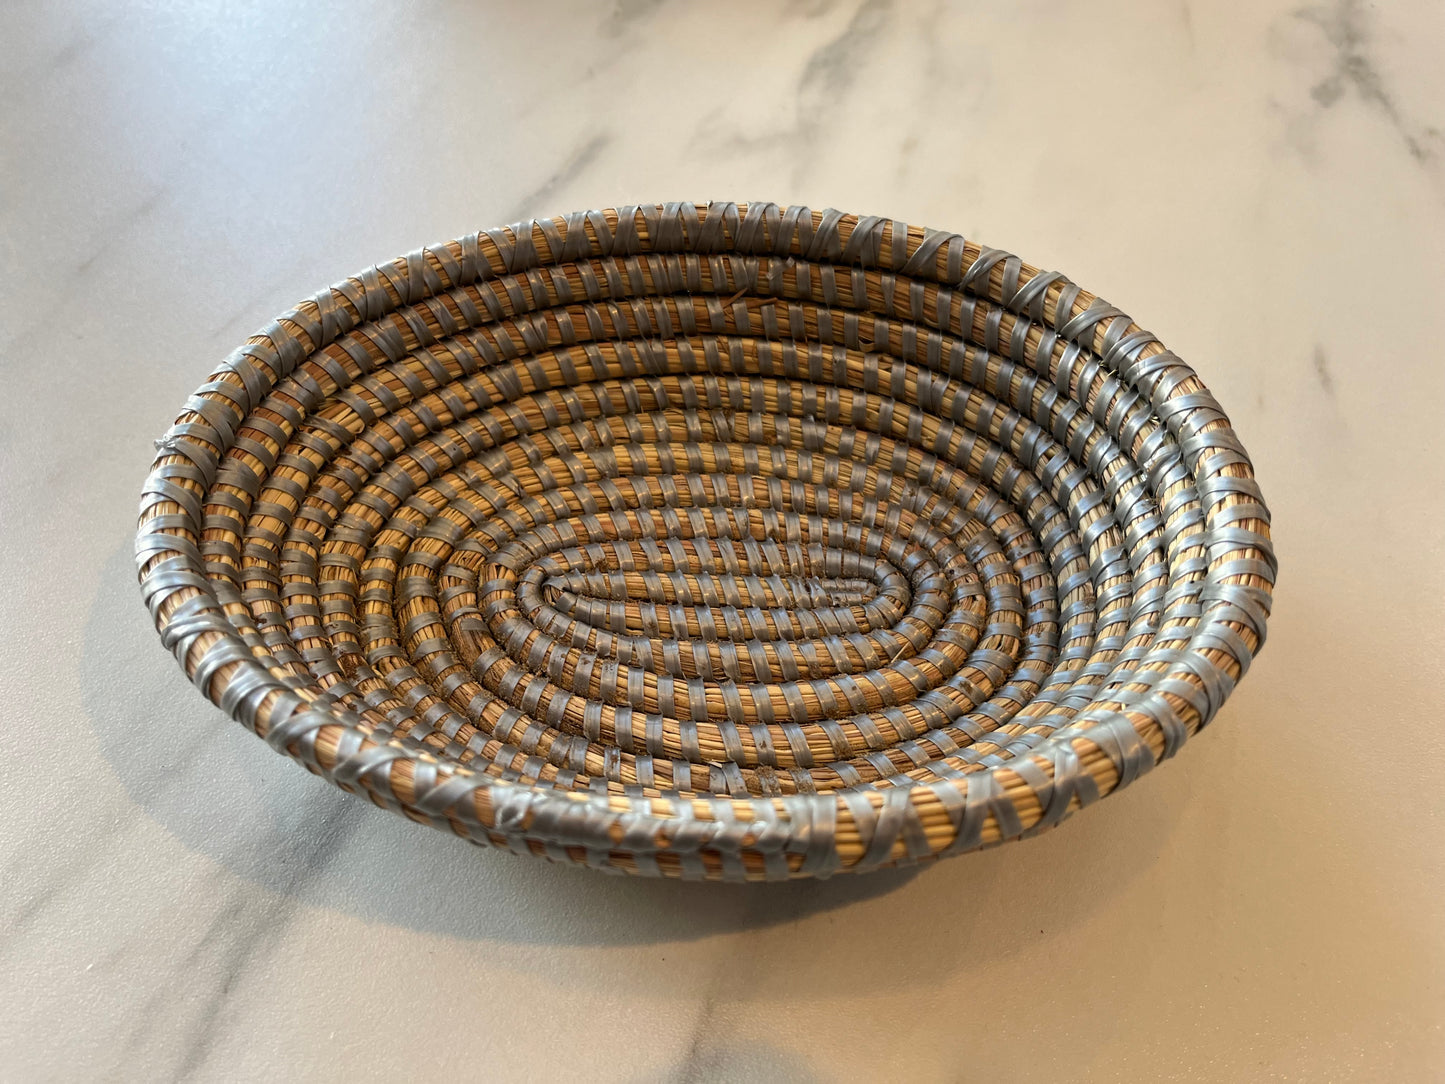 Oval Woven Table Baskets